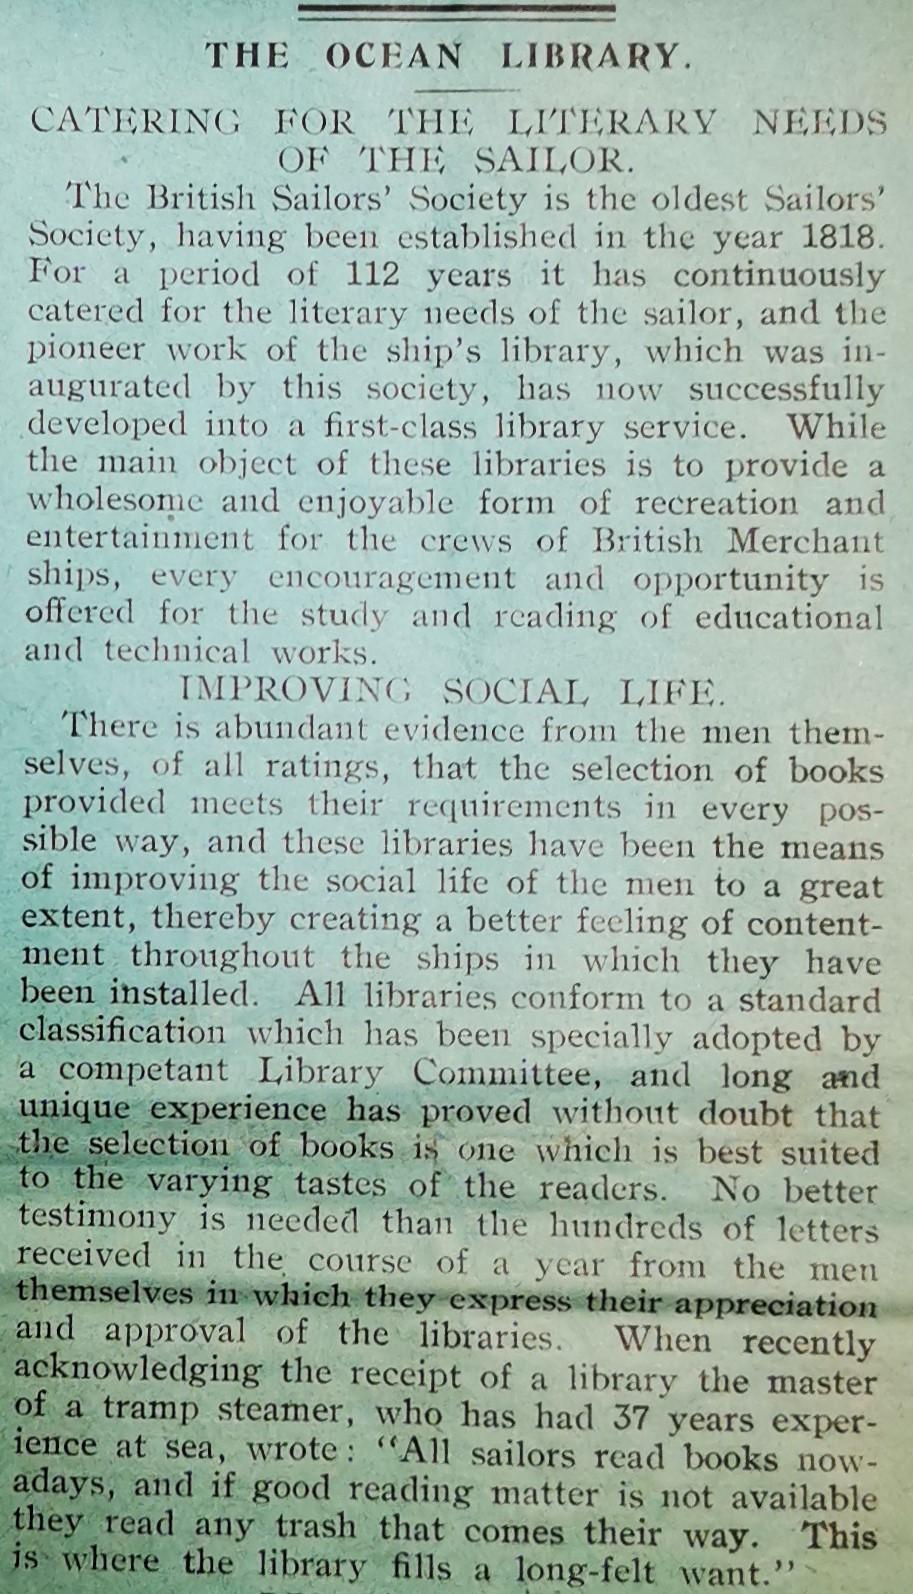 Article from the September 1931 issue explaining the benefits of the Ocean Library